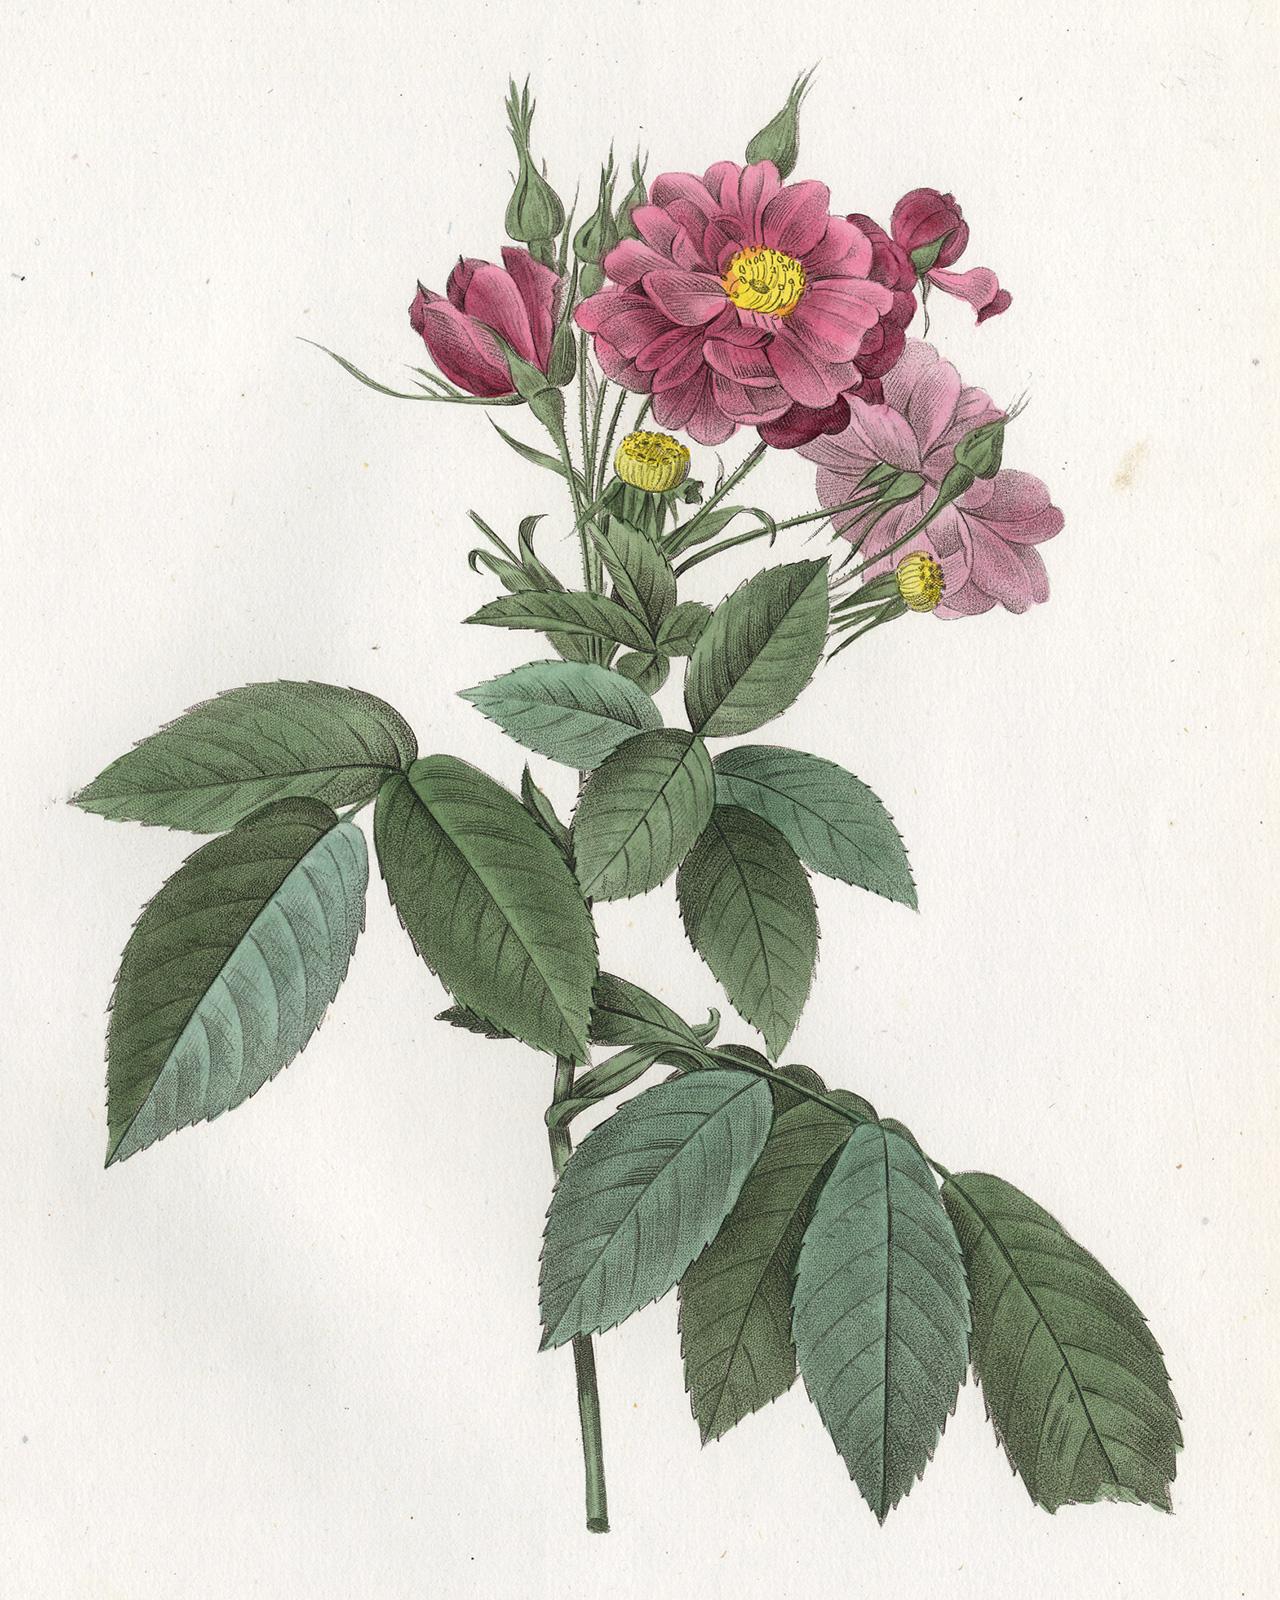 Boursault Rose by Redoute - Les Roses - Handcoloured engraving - 19th century - Print by Pierre-Joseph Redouté